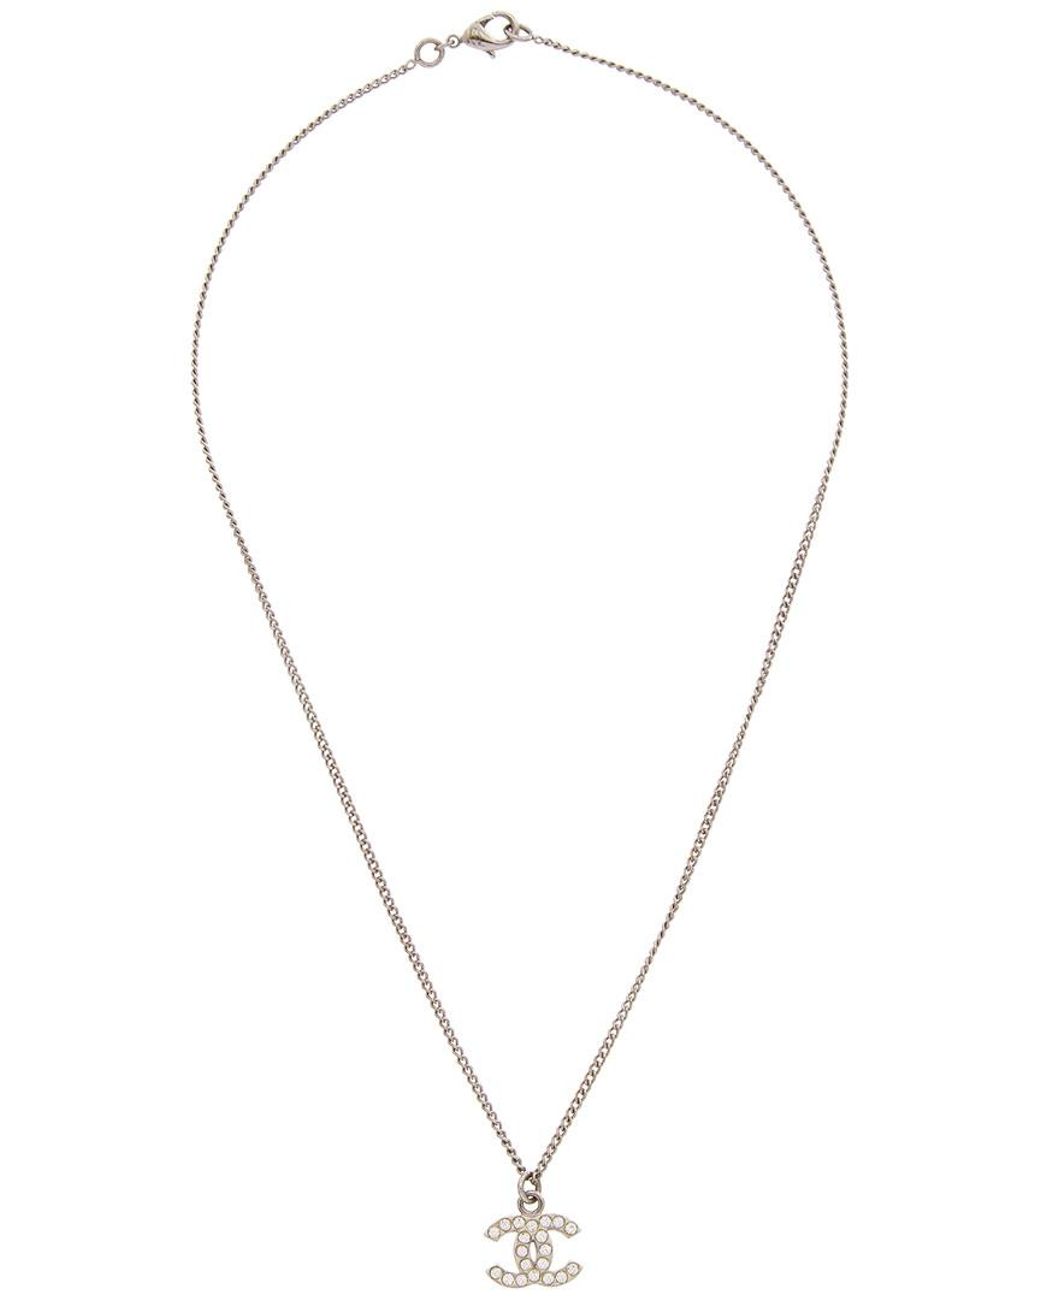 Cc necklace Chanel Gold in Metal - 39075237